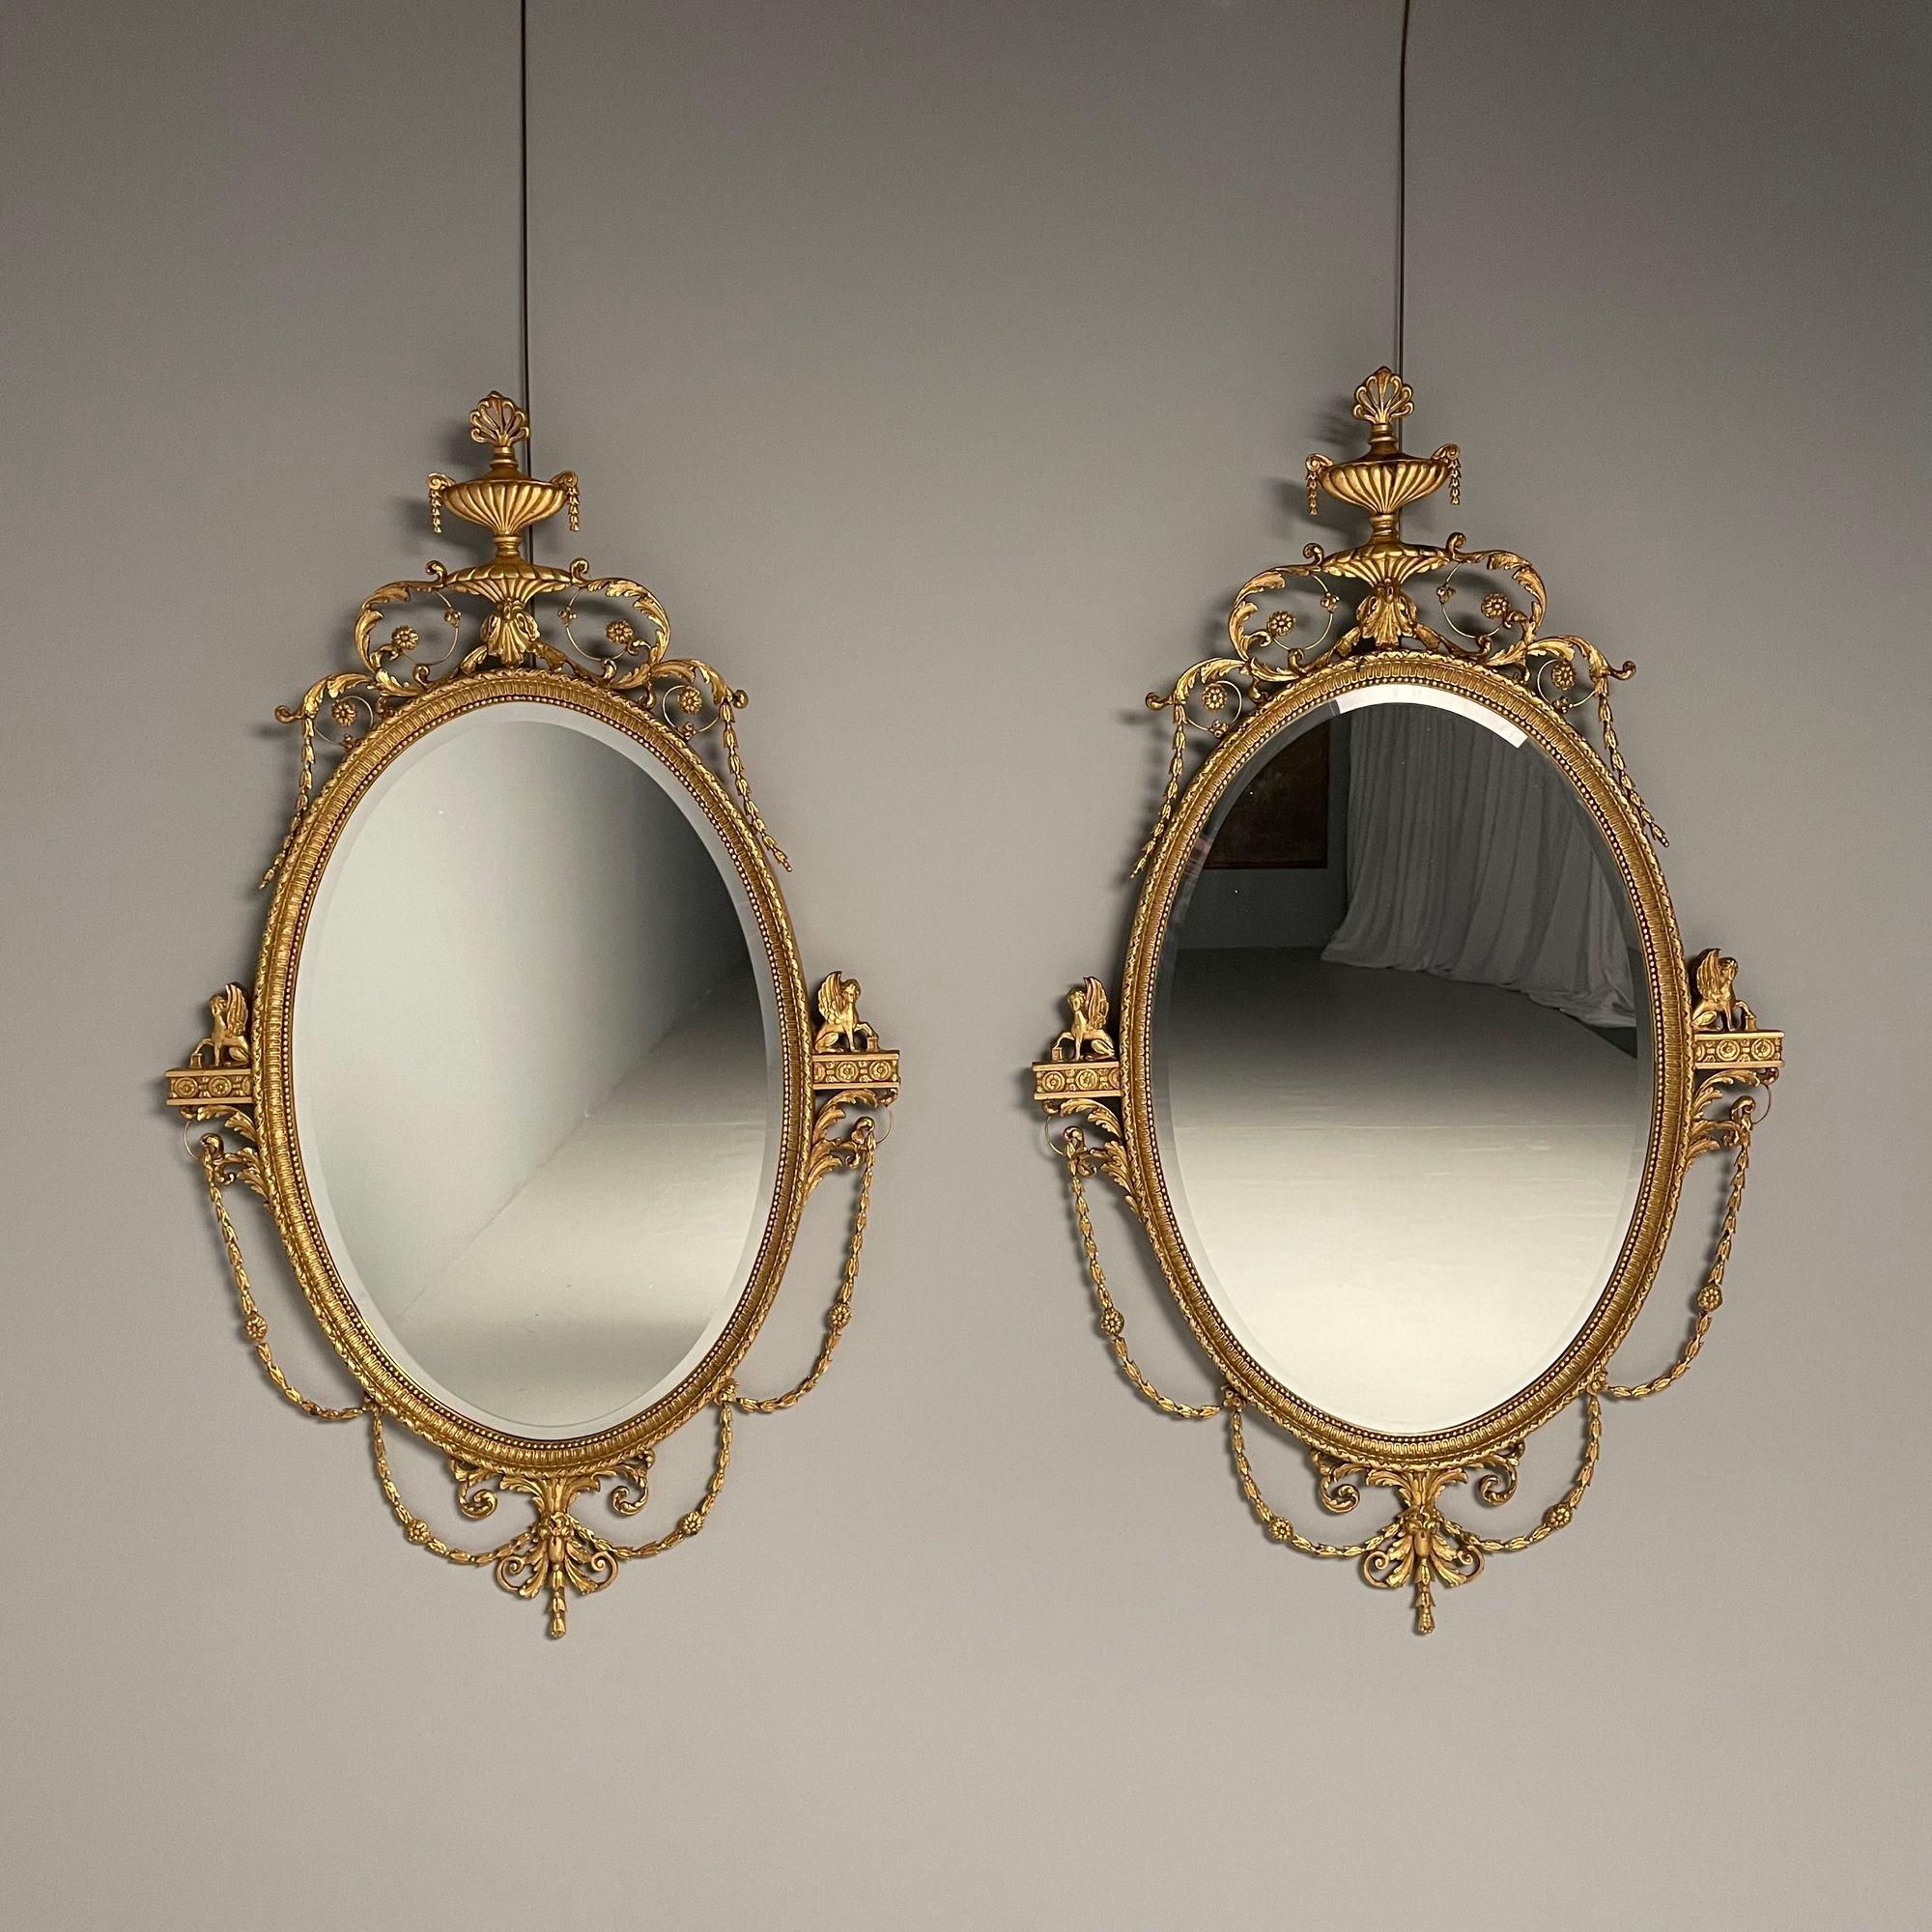 Adam Style Friedman Brothers, English Regency Style, Oval Wall Mirrors, Giltwood, Gesso For Sale